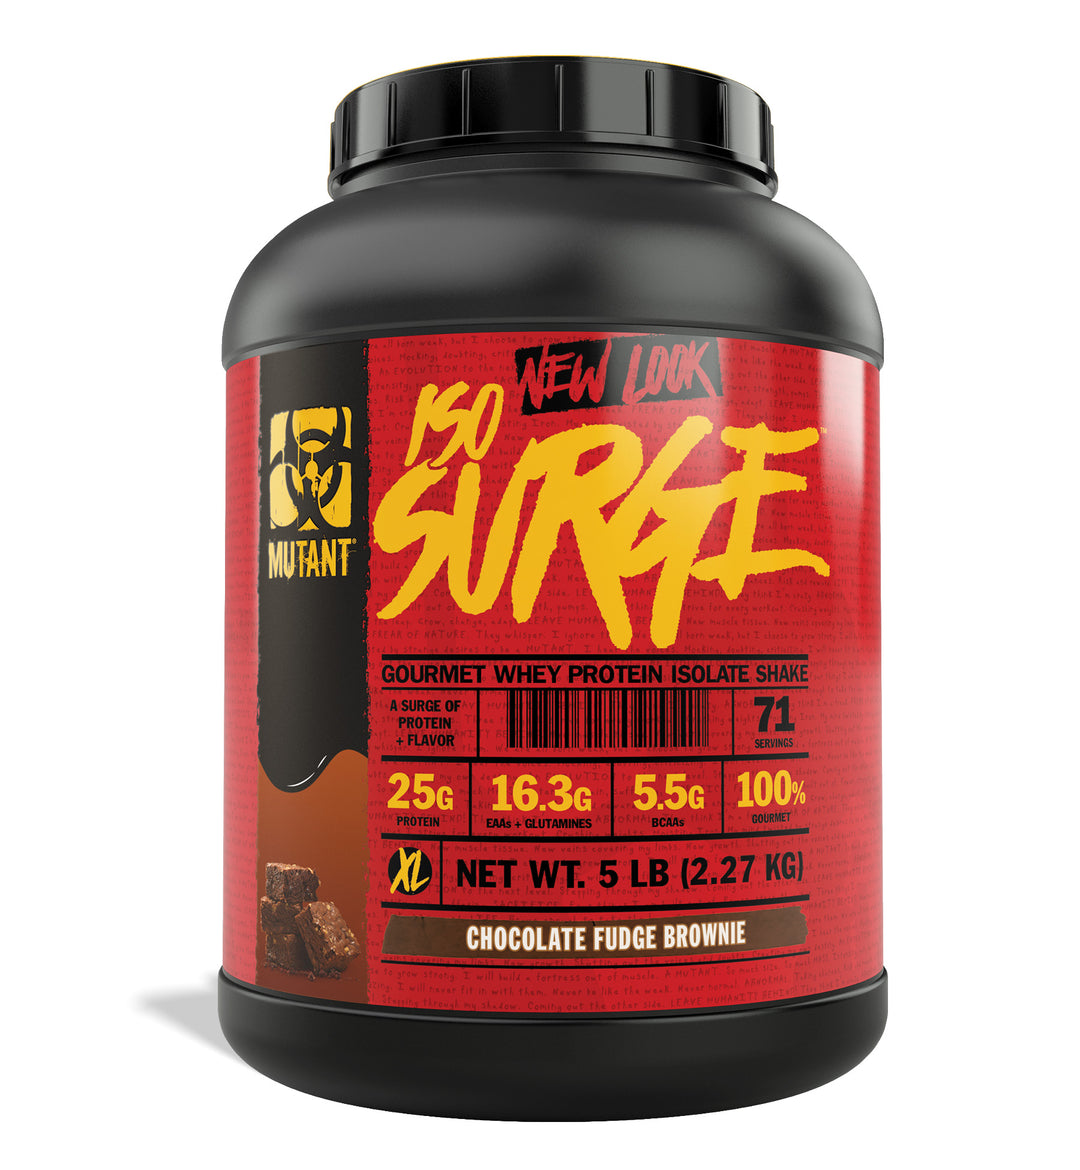 ISO SURGE 5LBS - Whey Protein Isolate